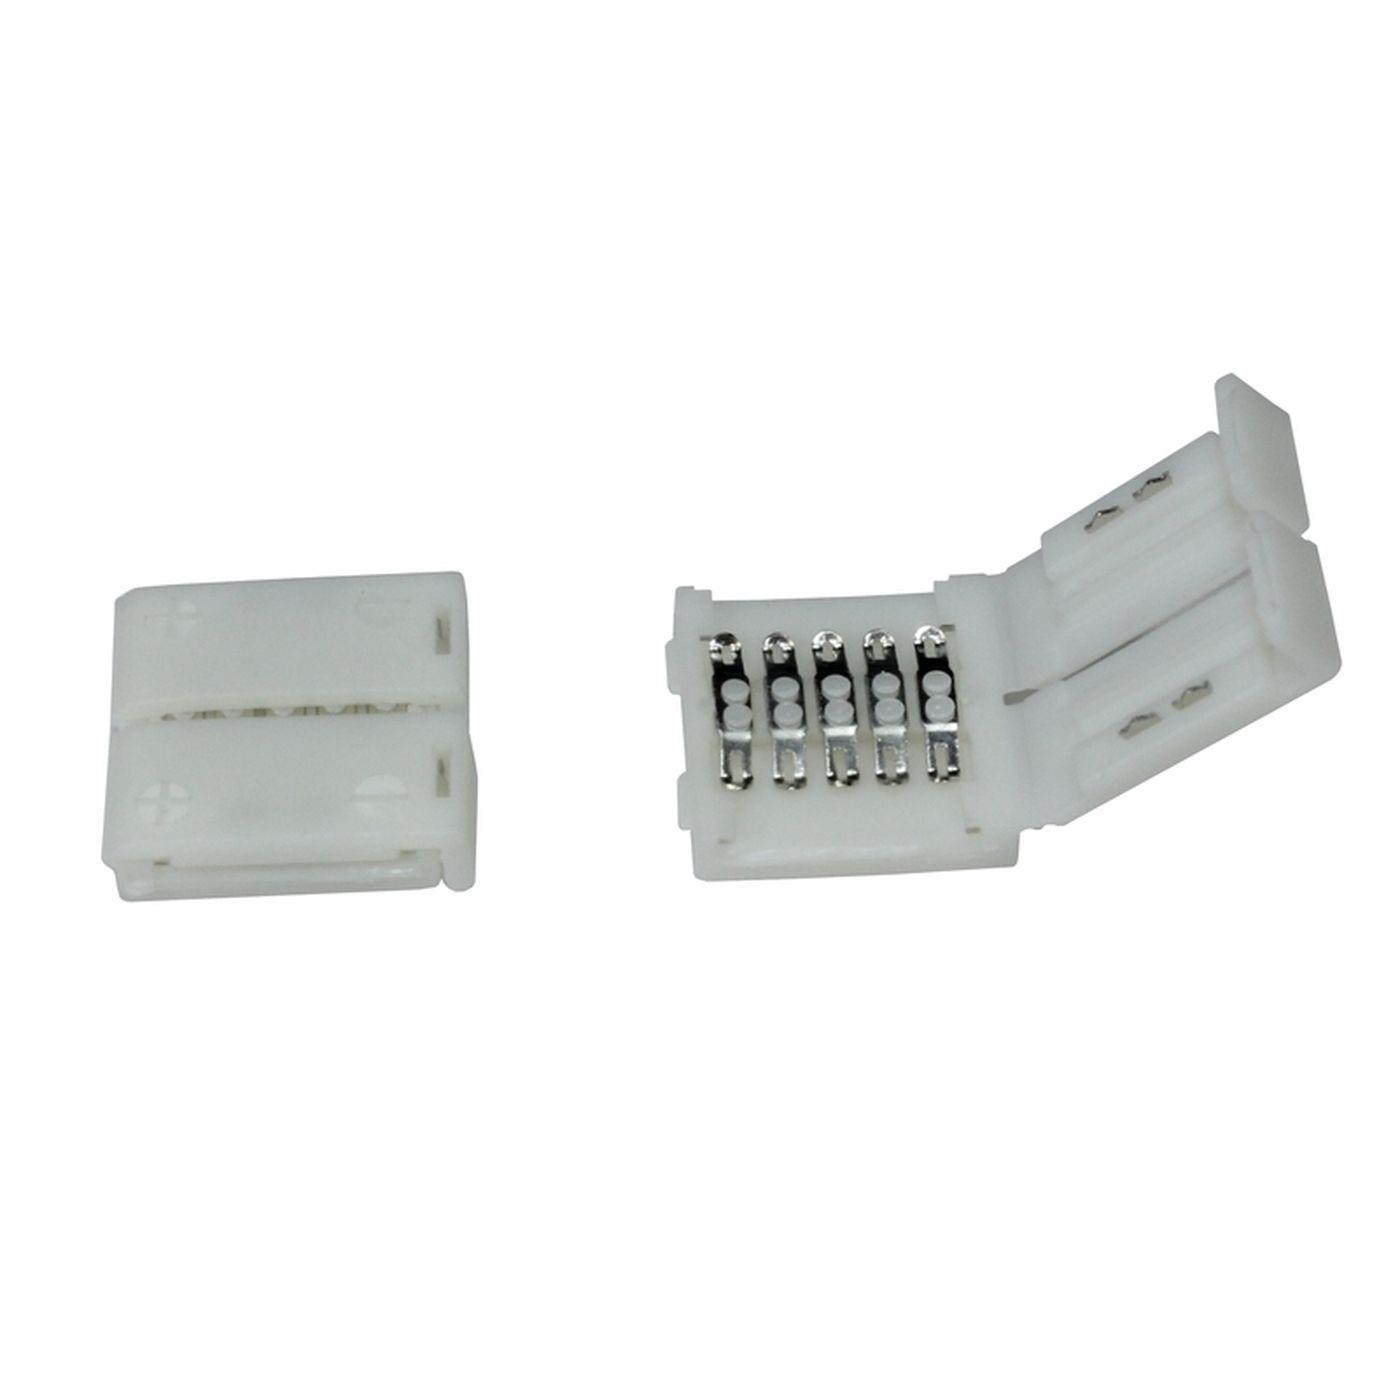 RGBW LED Clip Connector for 10mm RGBW LED Strip 15x5mm